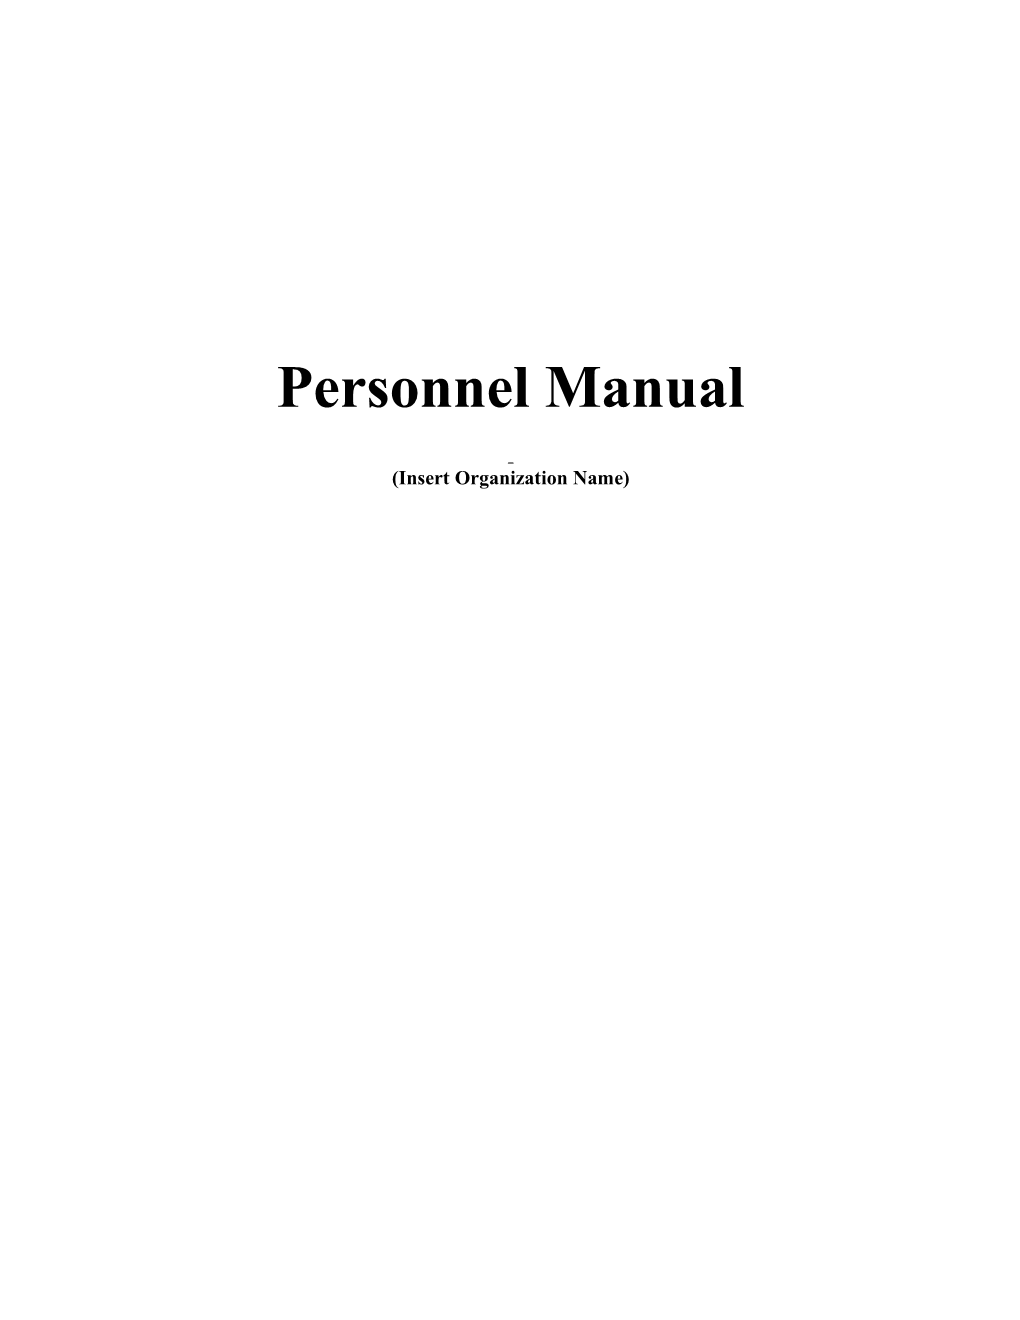 Personnel Manual